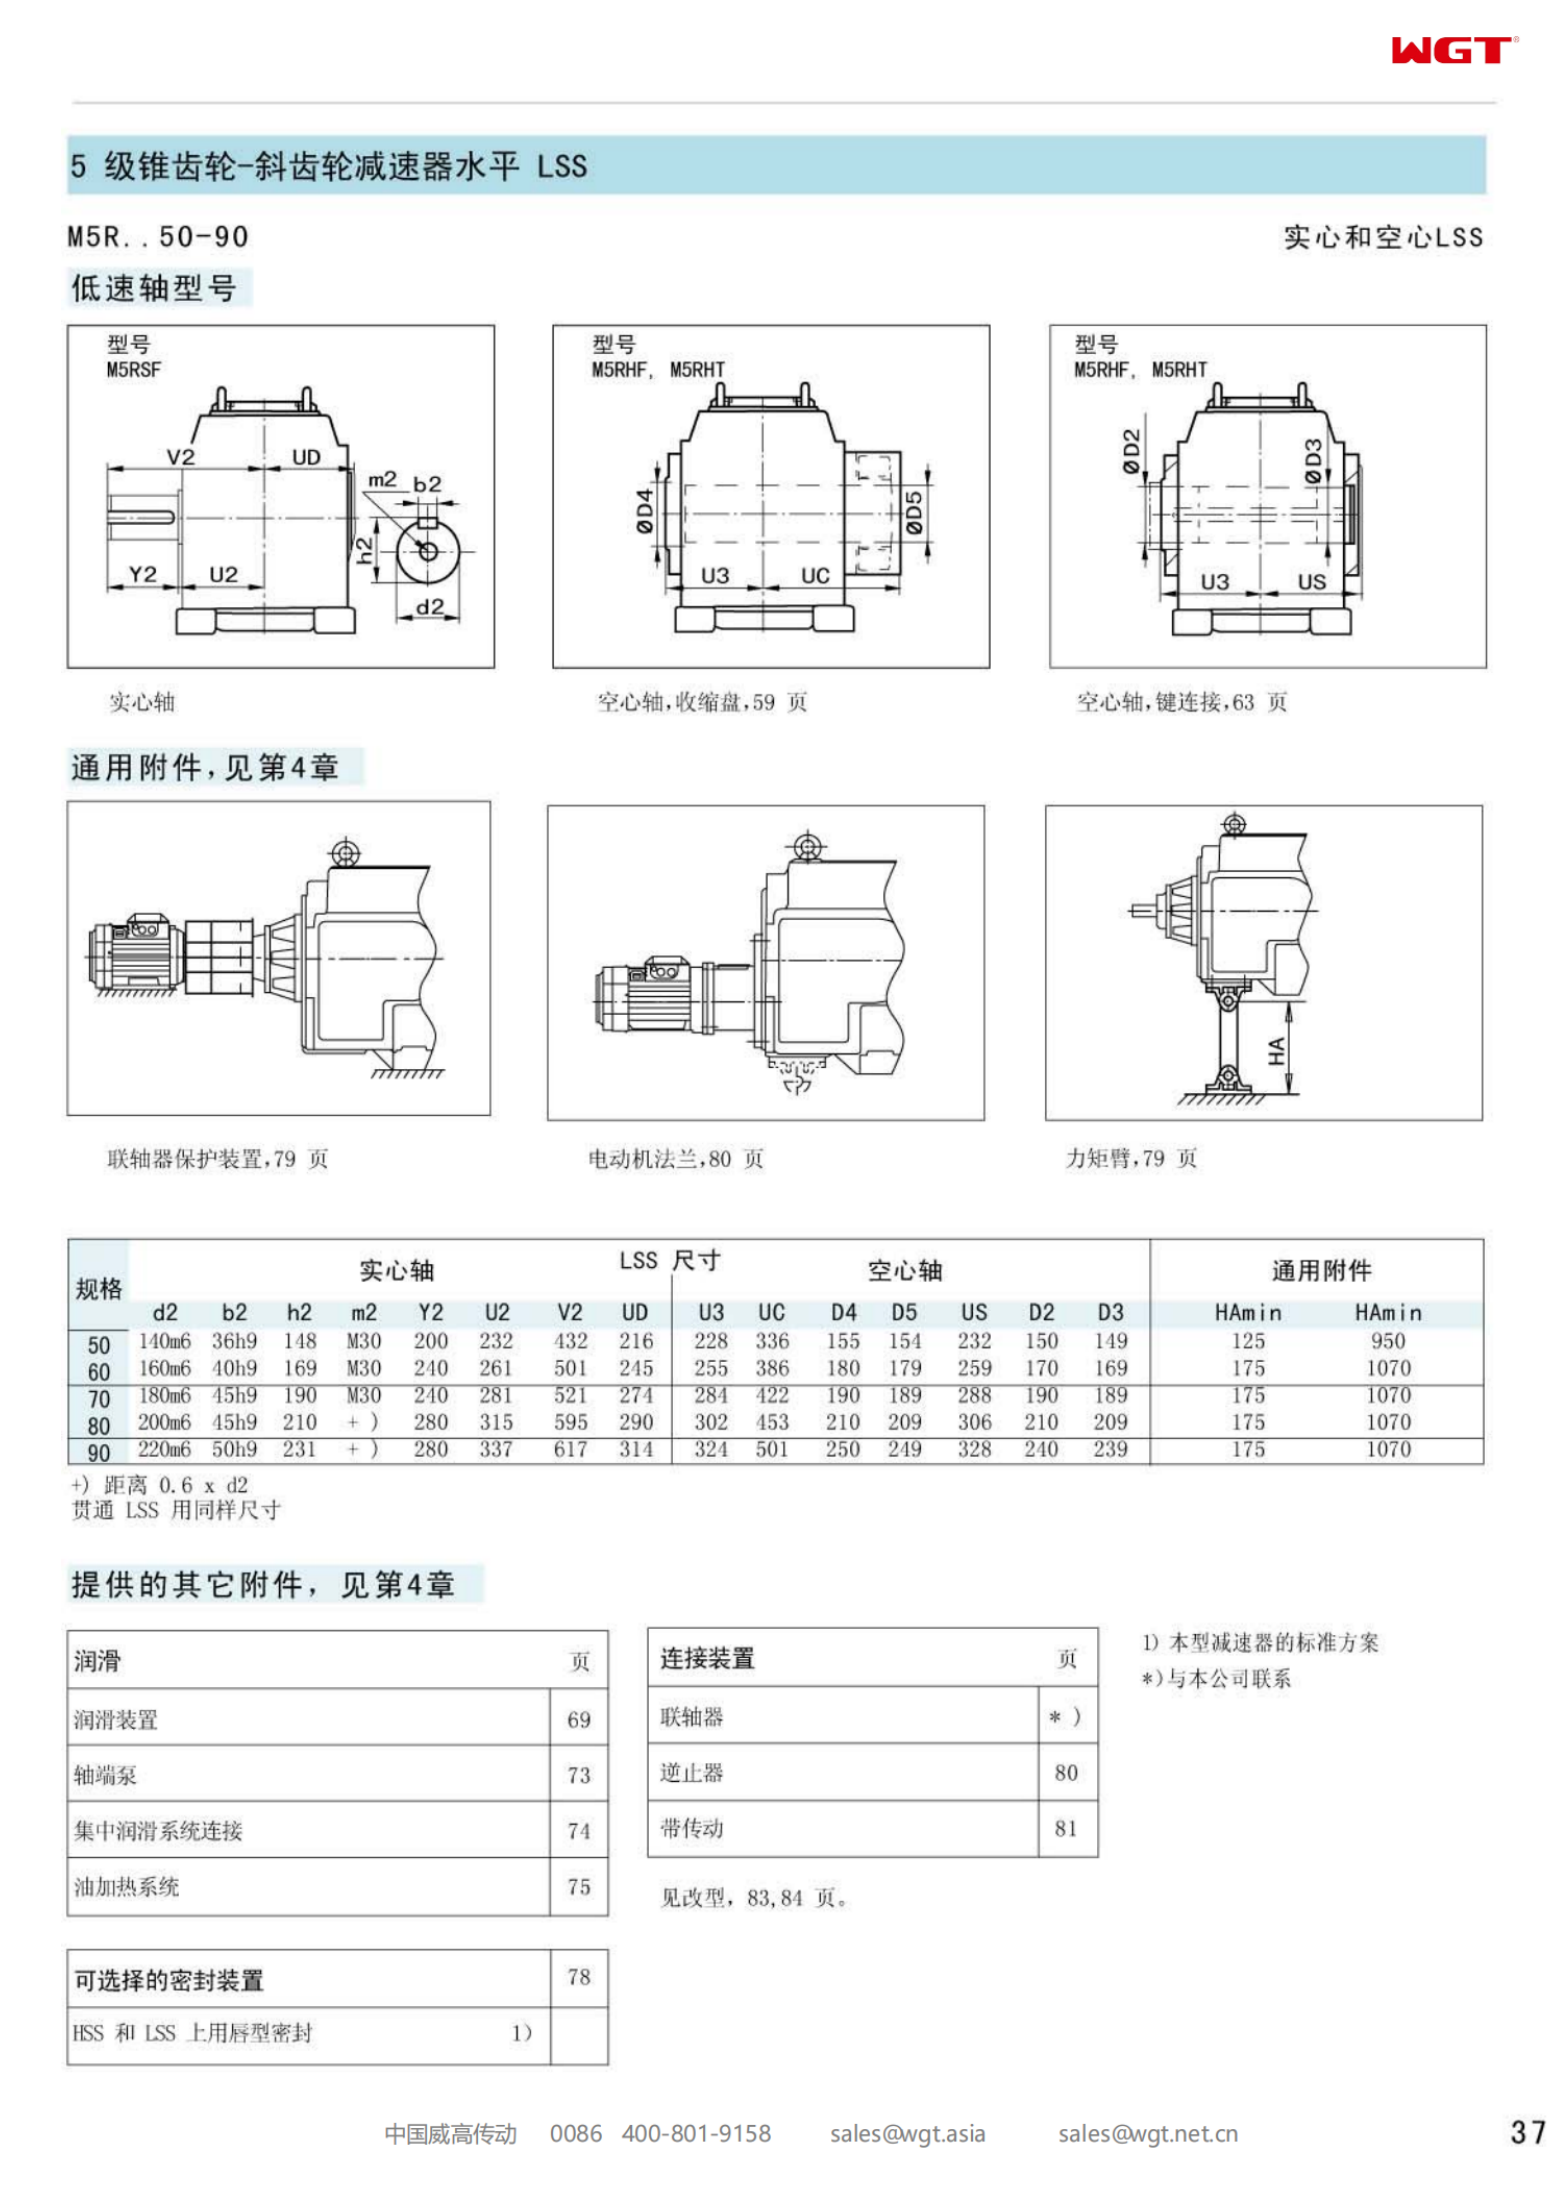 M5RSF80 Replace_SEW_M_Series Gearbox